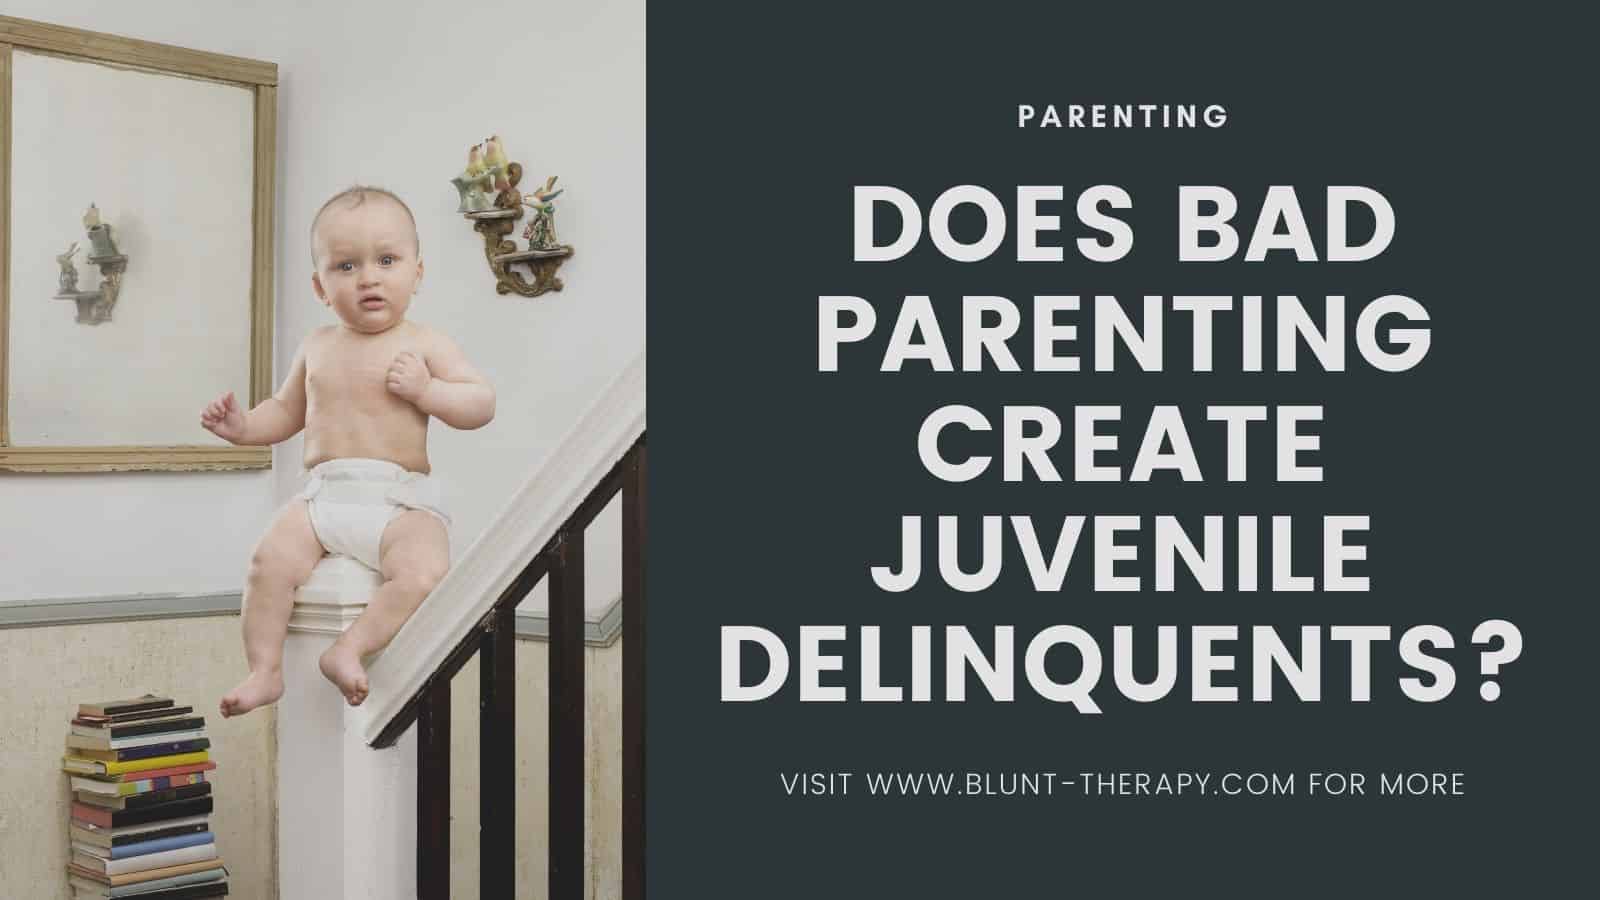 Does Bad Parenting Create Juvenile Delinquents